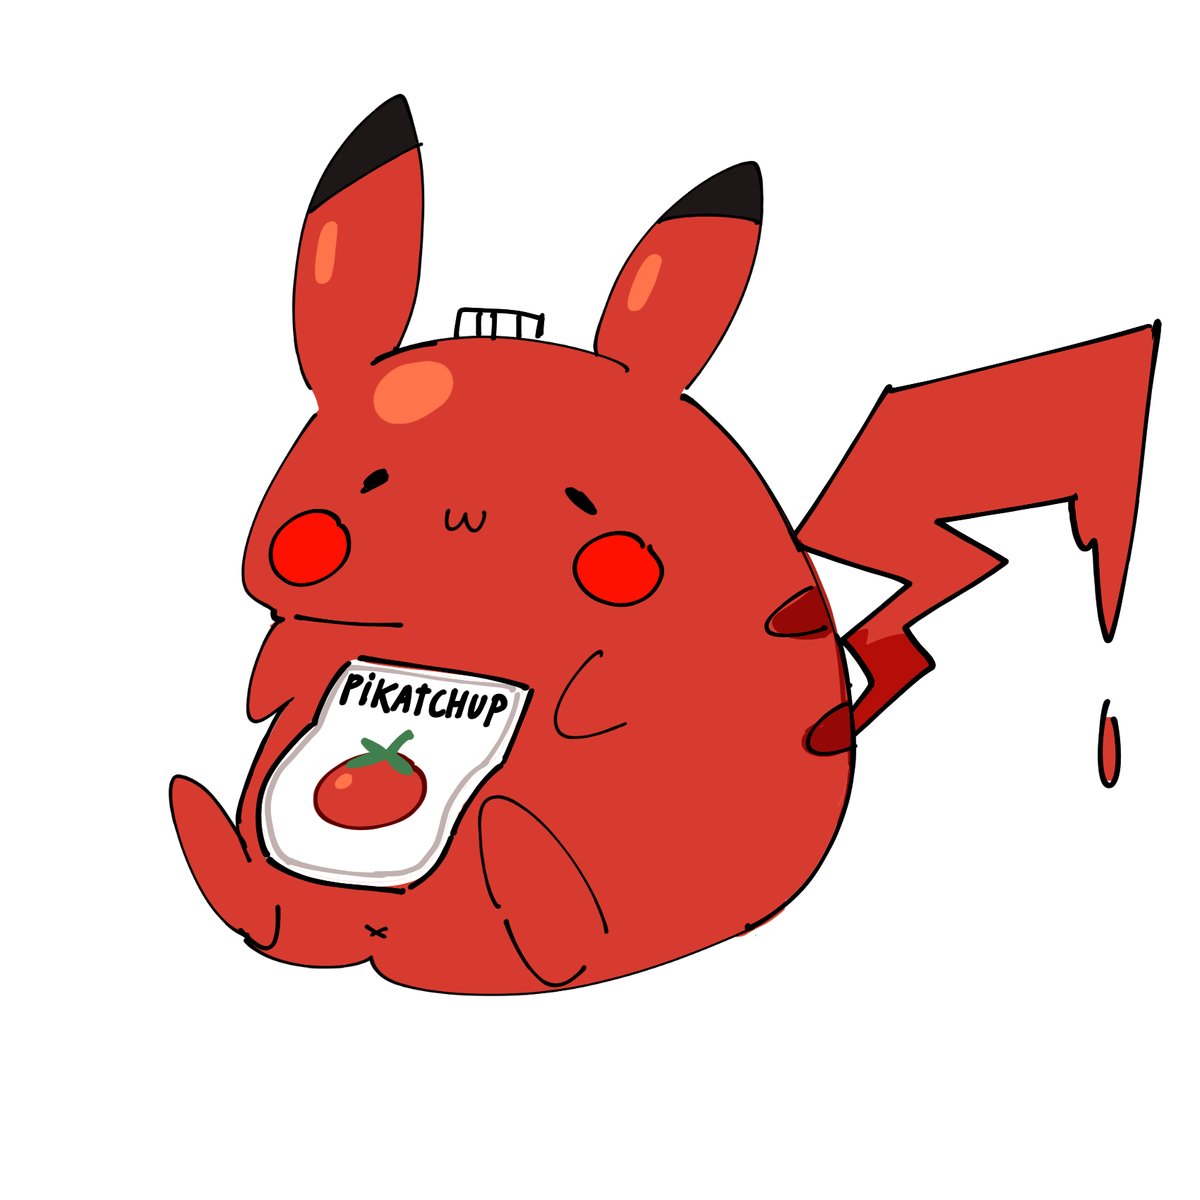 Today I dreamt I drew something that reached a 1M likes. I tried to replicate exactly as the drawing was in my dream. The fun part is that I didn't remember how to draw his tail and I've found that Pikachu loves ketchup for some reason. Pikatchup🎨 Don't ask.